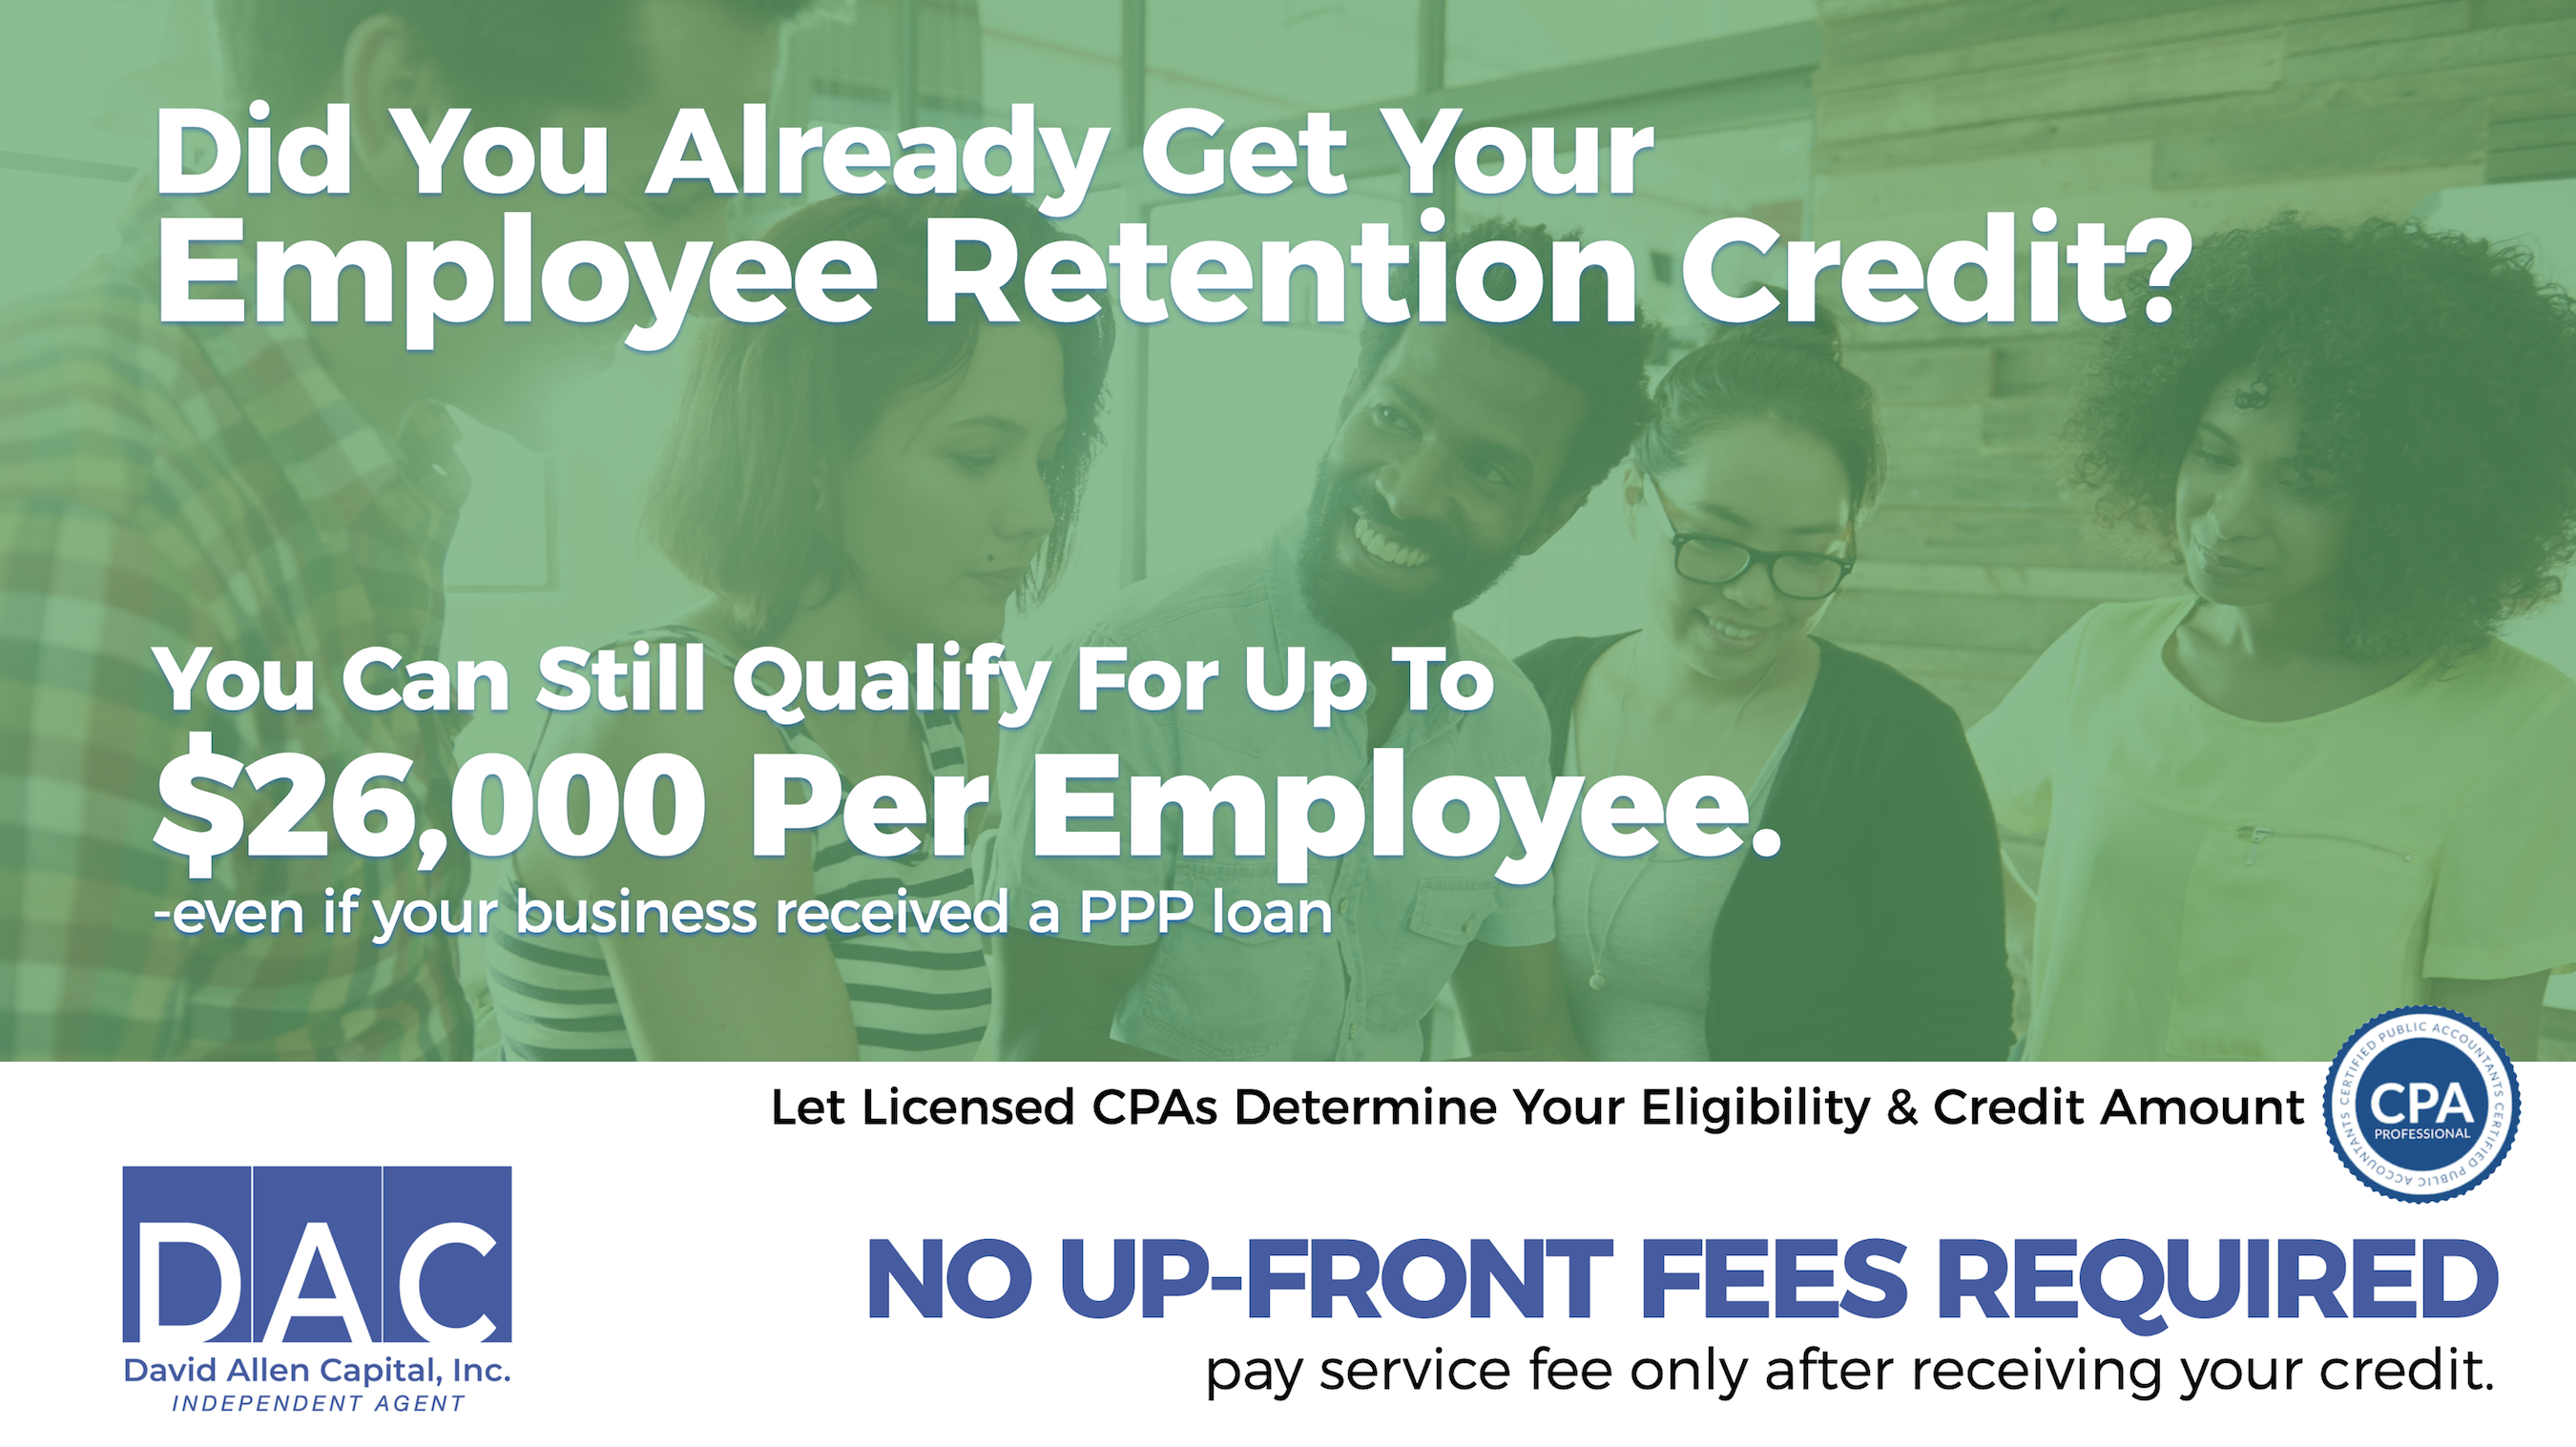 IRS Employee Retention Credit 2022 – Up To $26,000 Per Employee